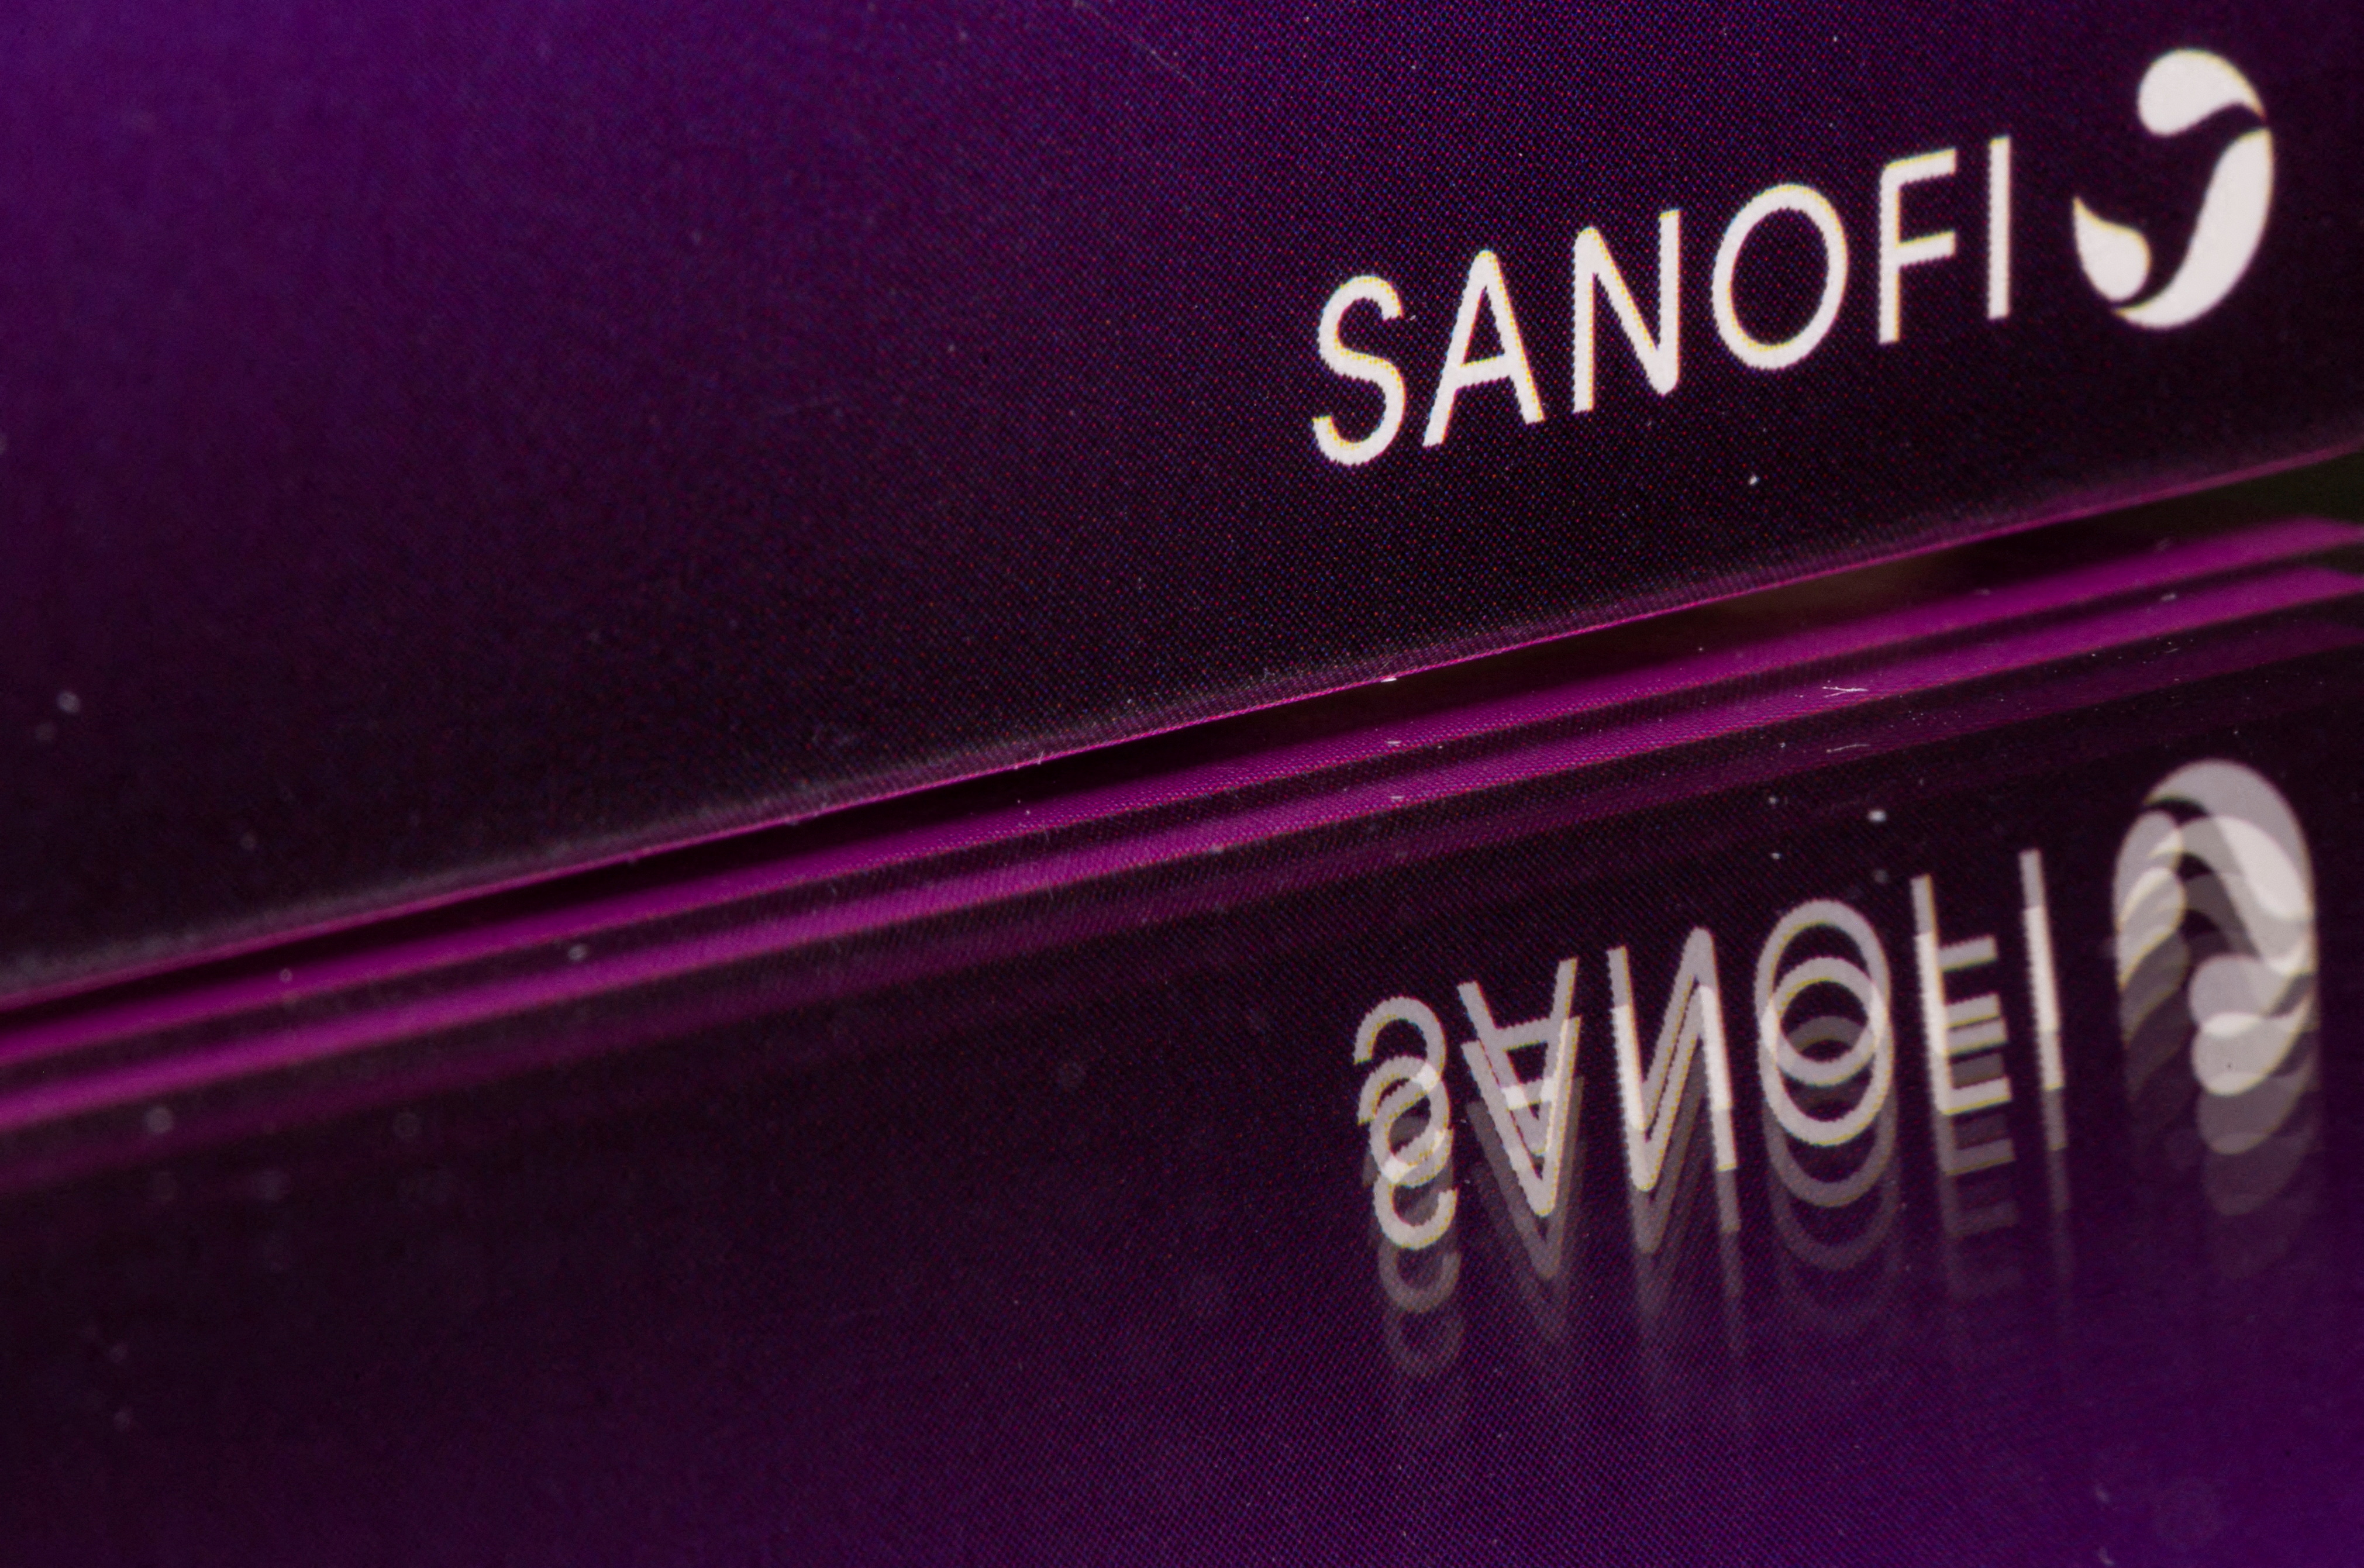 The Sanofi logo is seen on a product box in this illustration